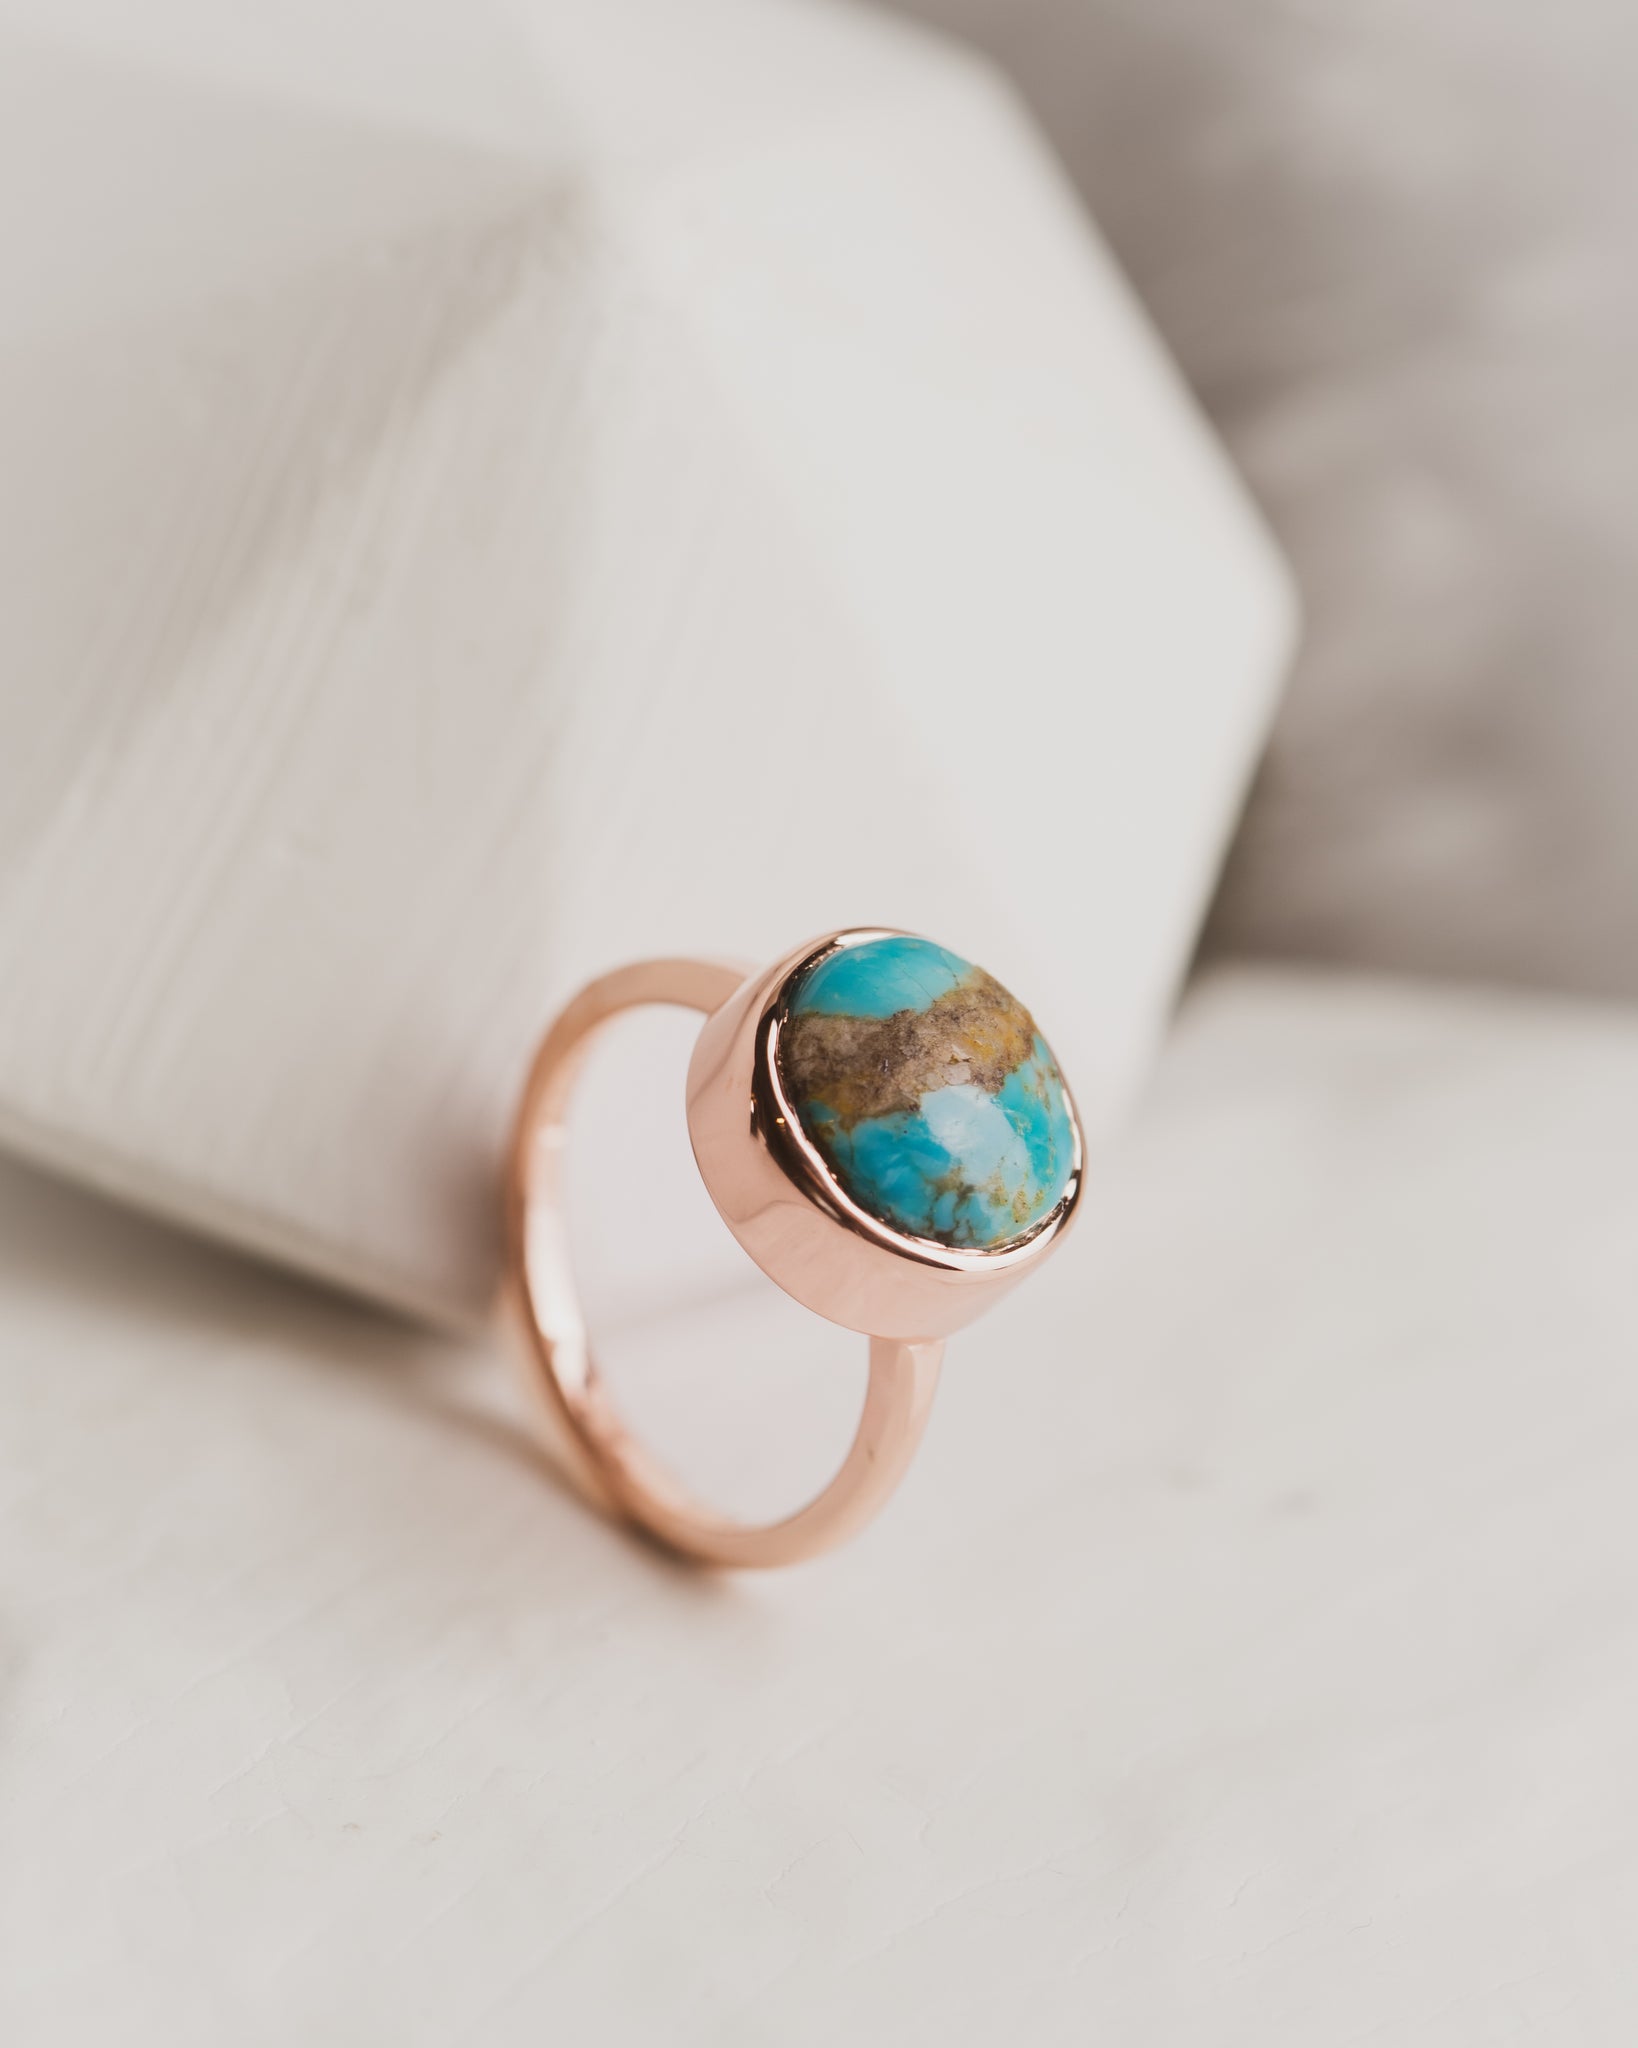 Rose Gold Turquoise Ring